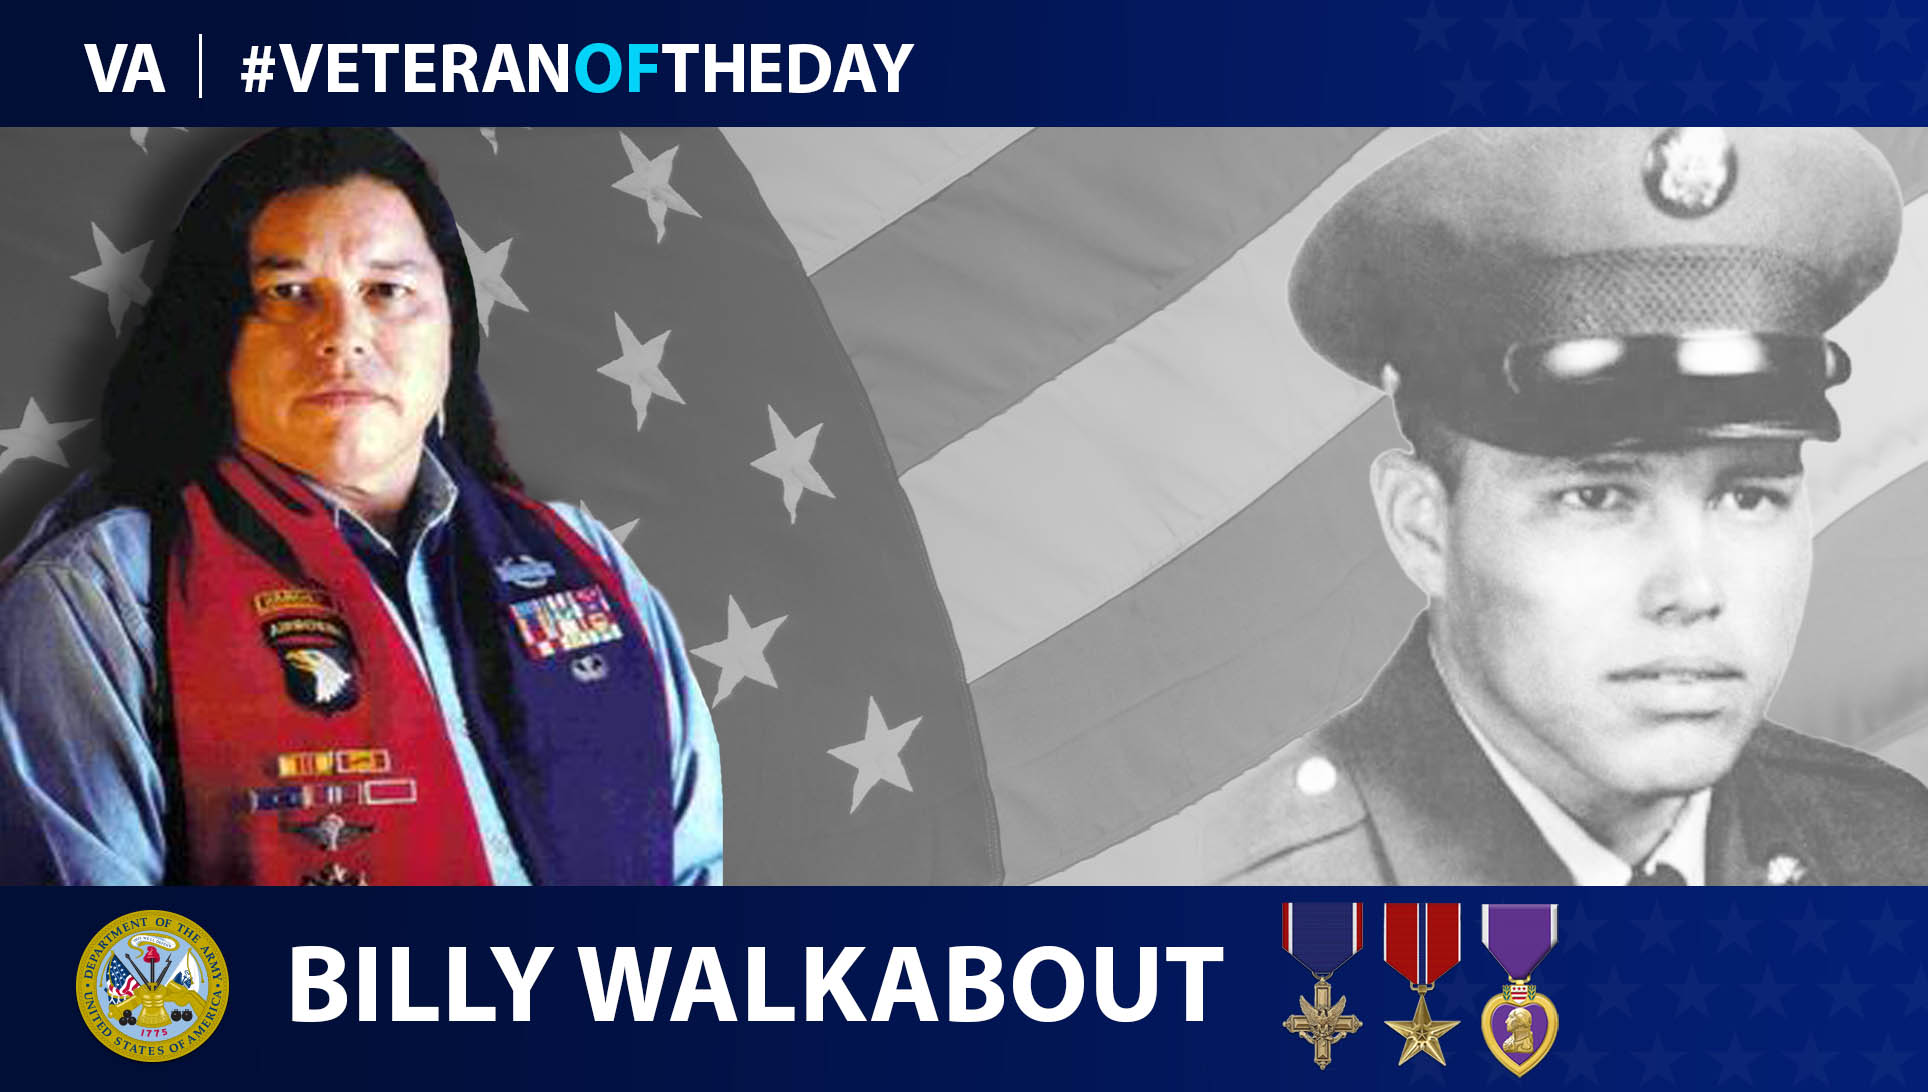 Army Veteran Billy Walkabout is today's Veteran of the Day.